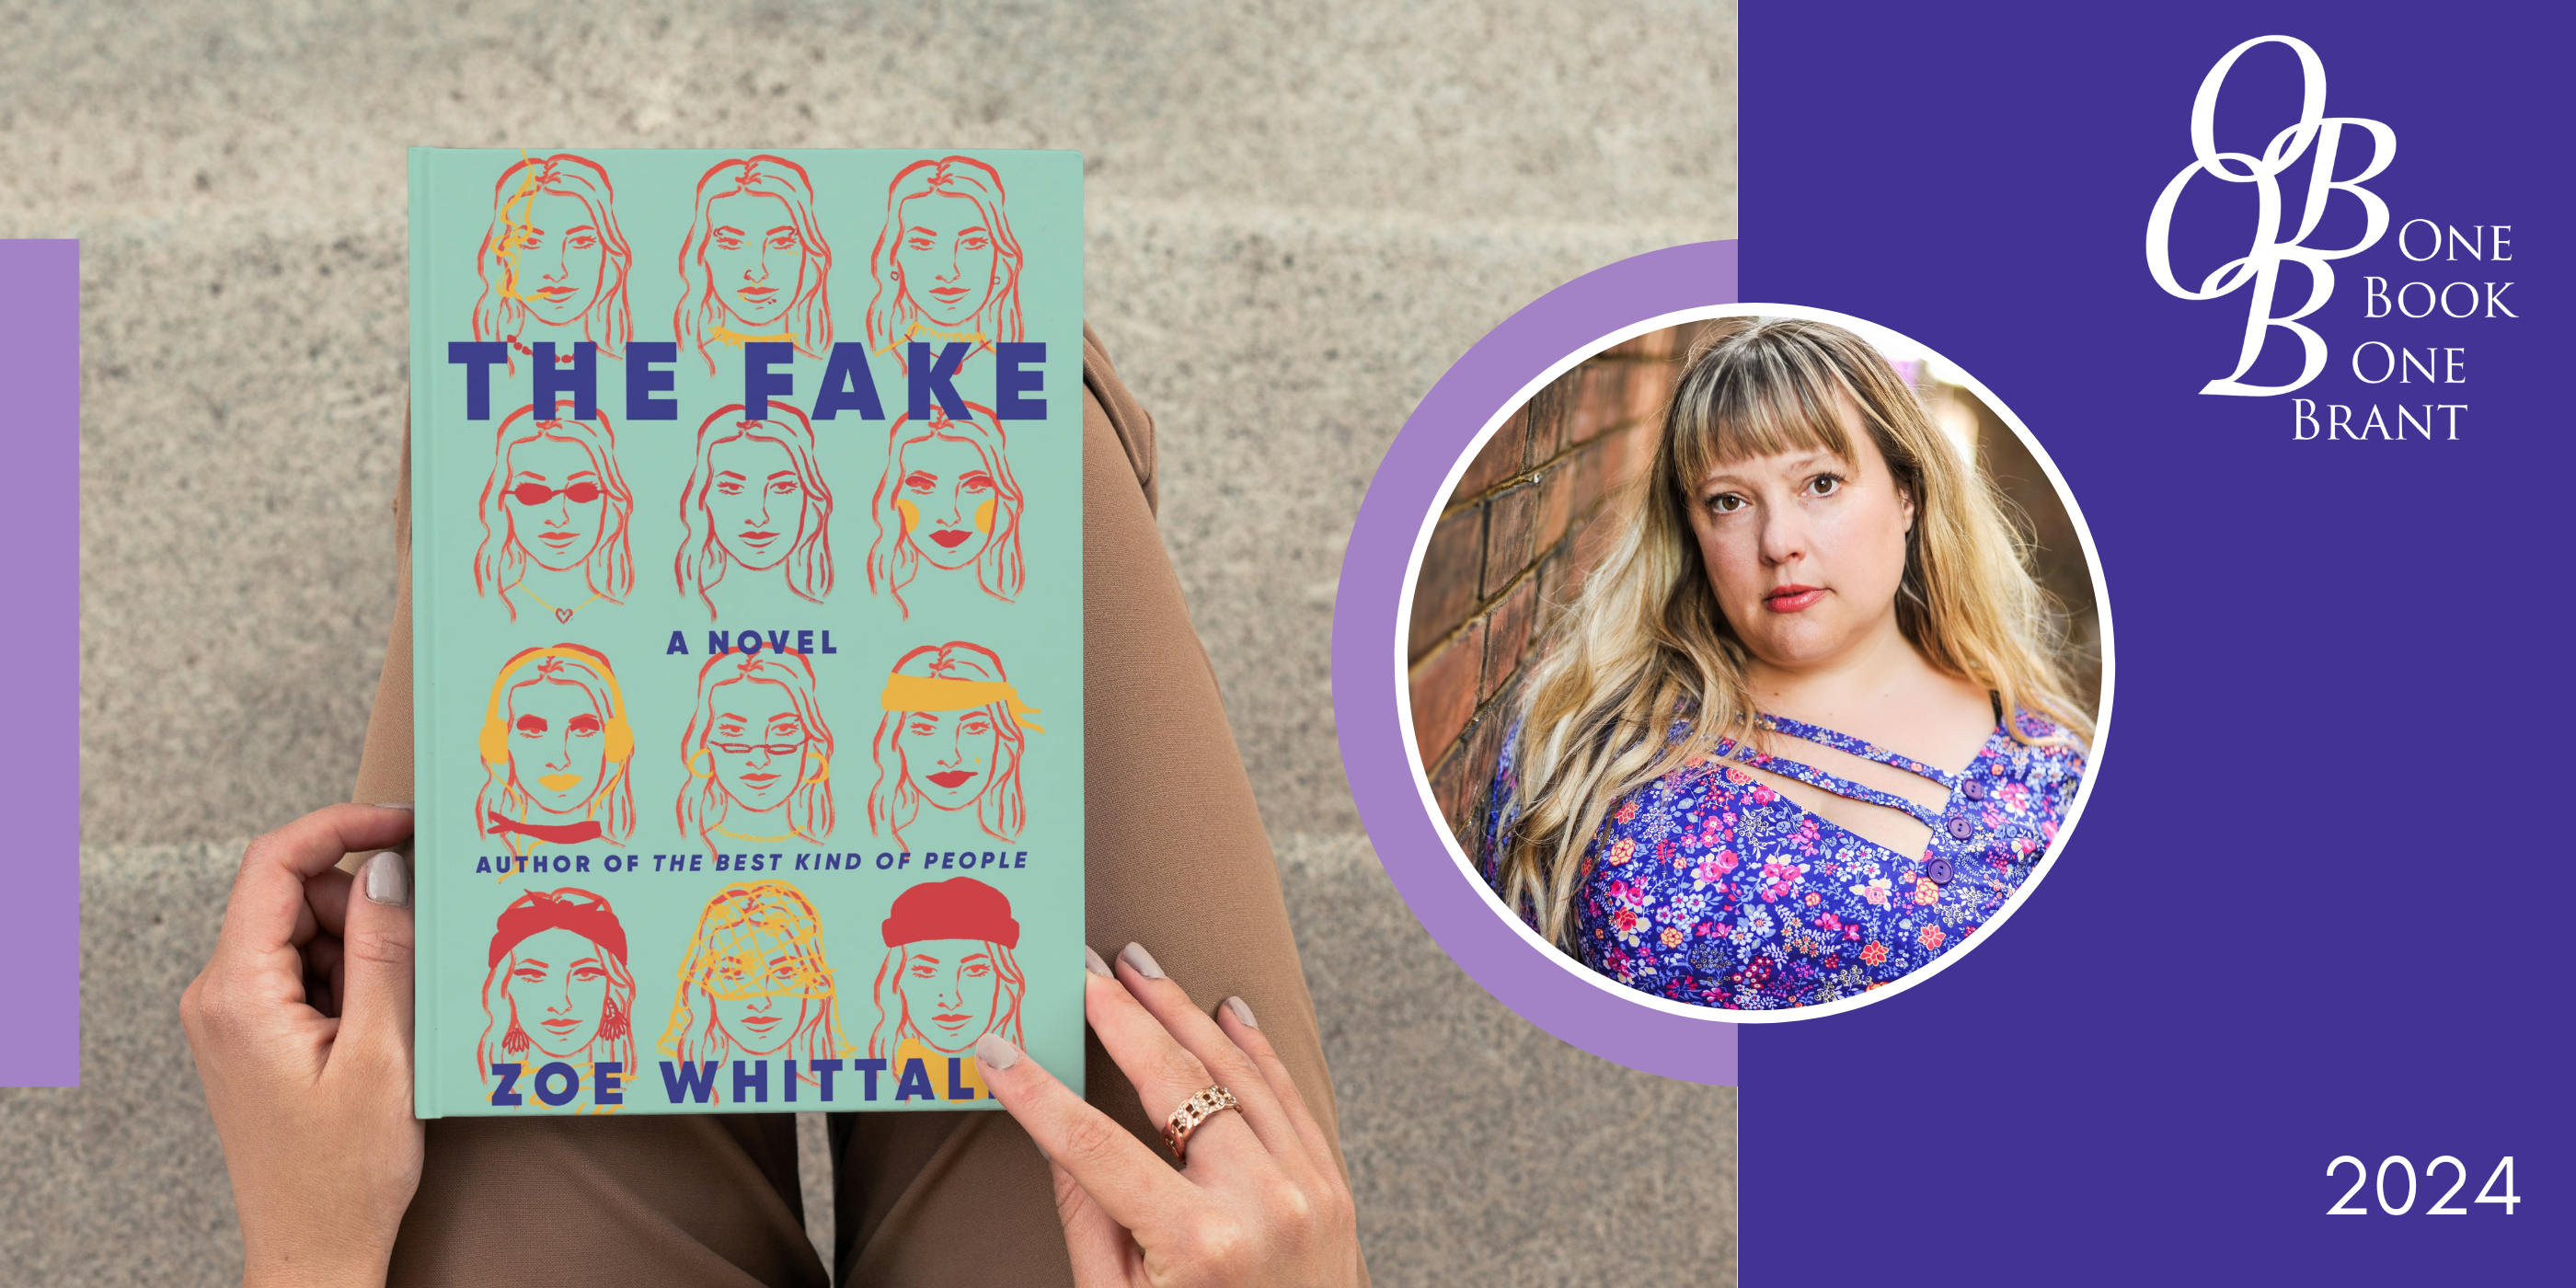 Design graphic showing hands holding the book The Fake by Zoe Whittall. A portrait of the author is included on the right-hand side, as is the One Book, One Brant logo.